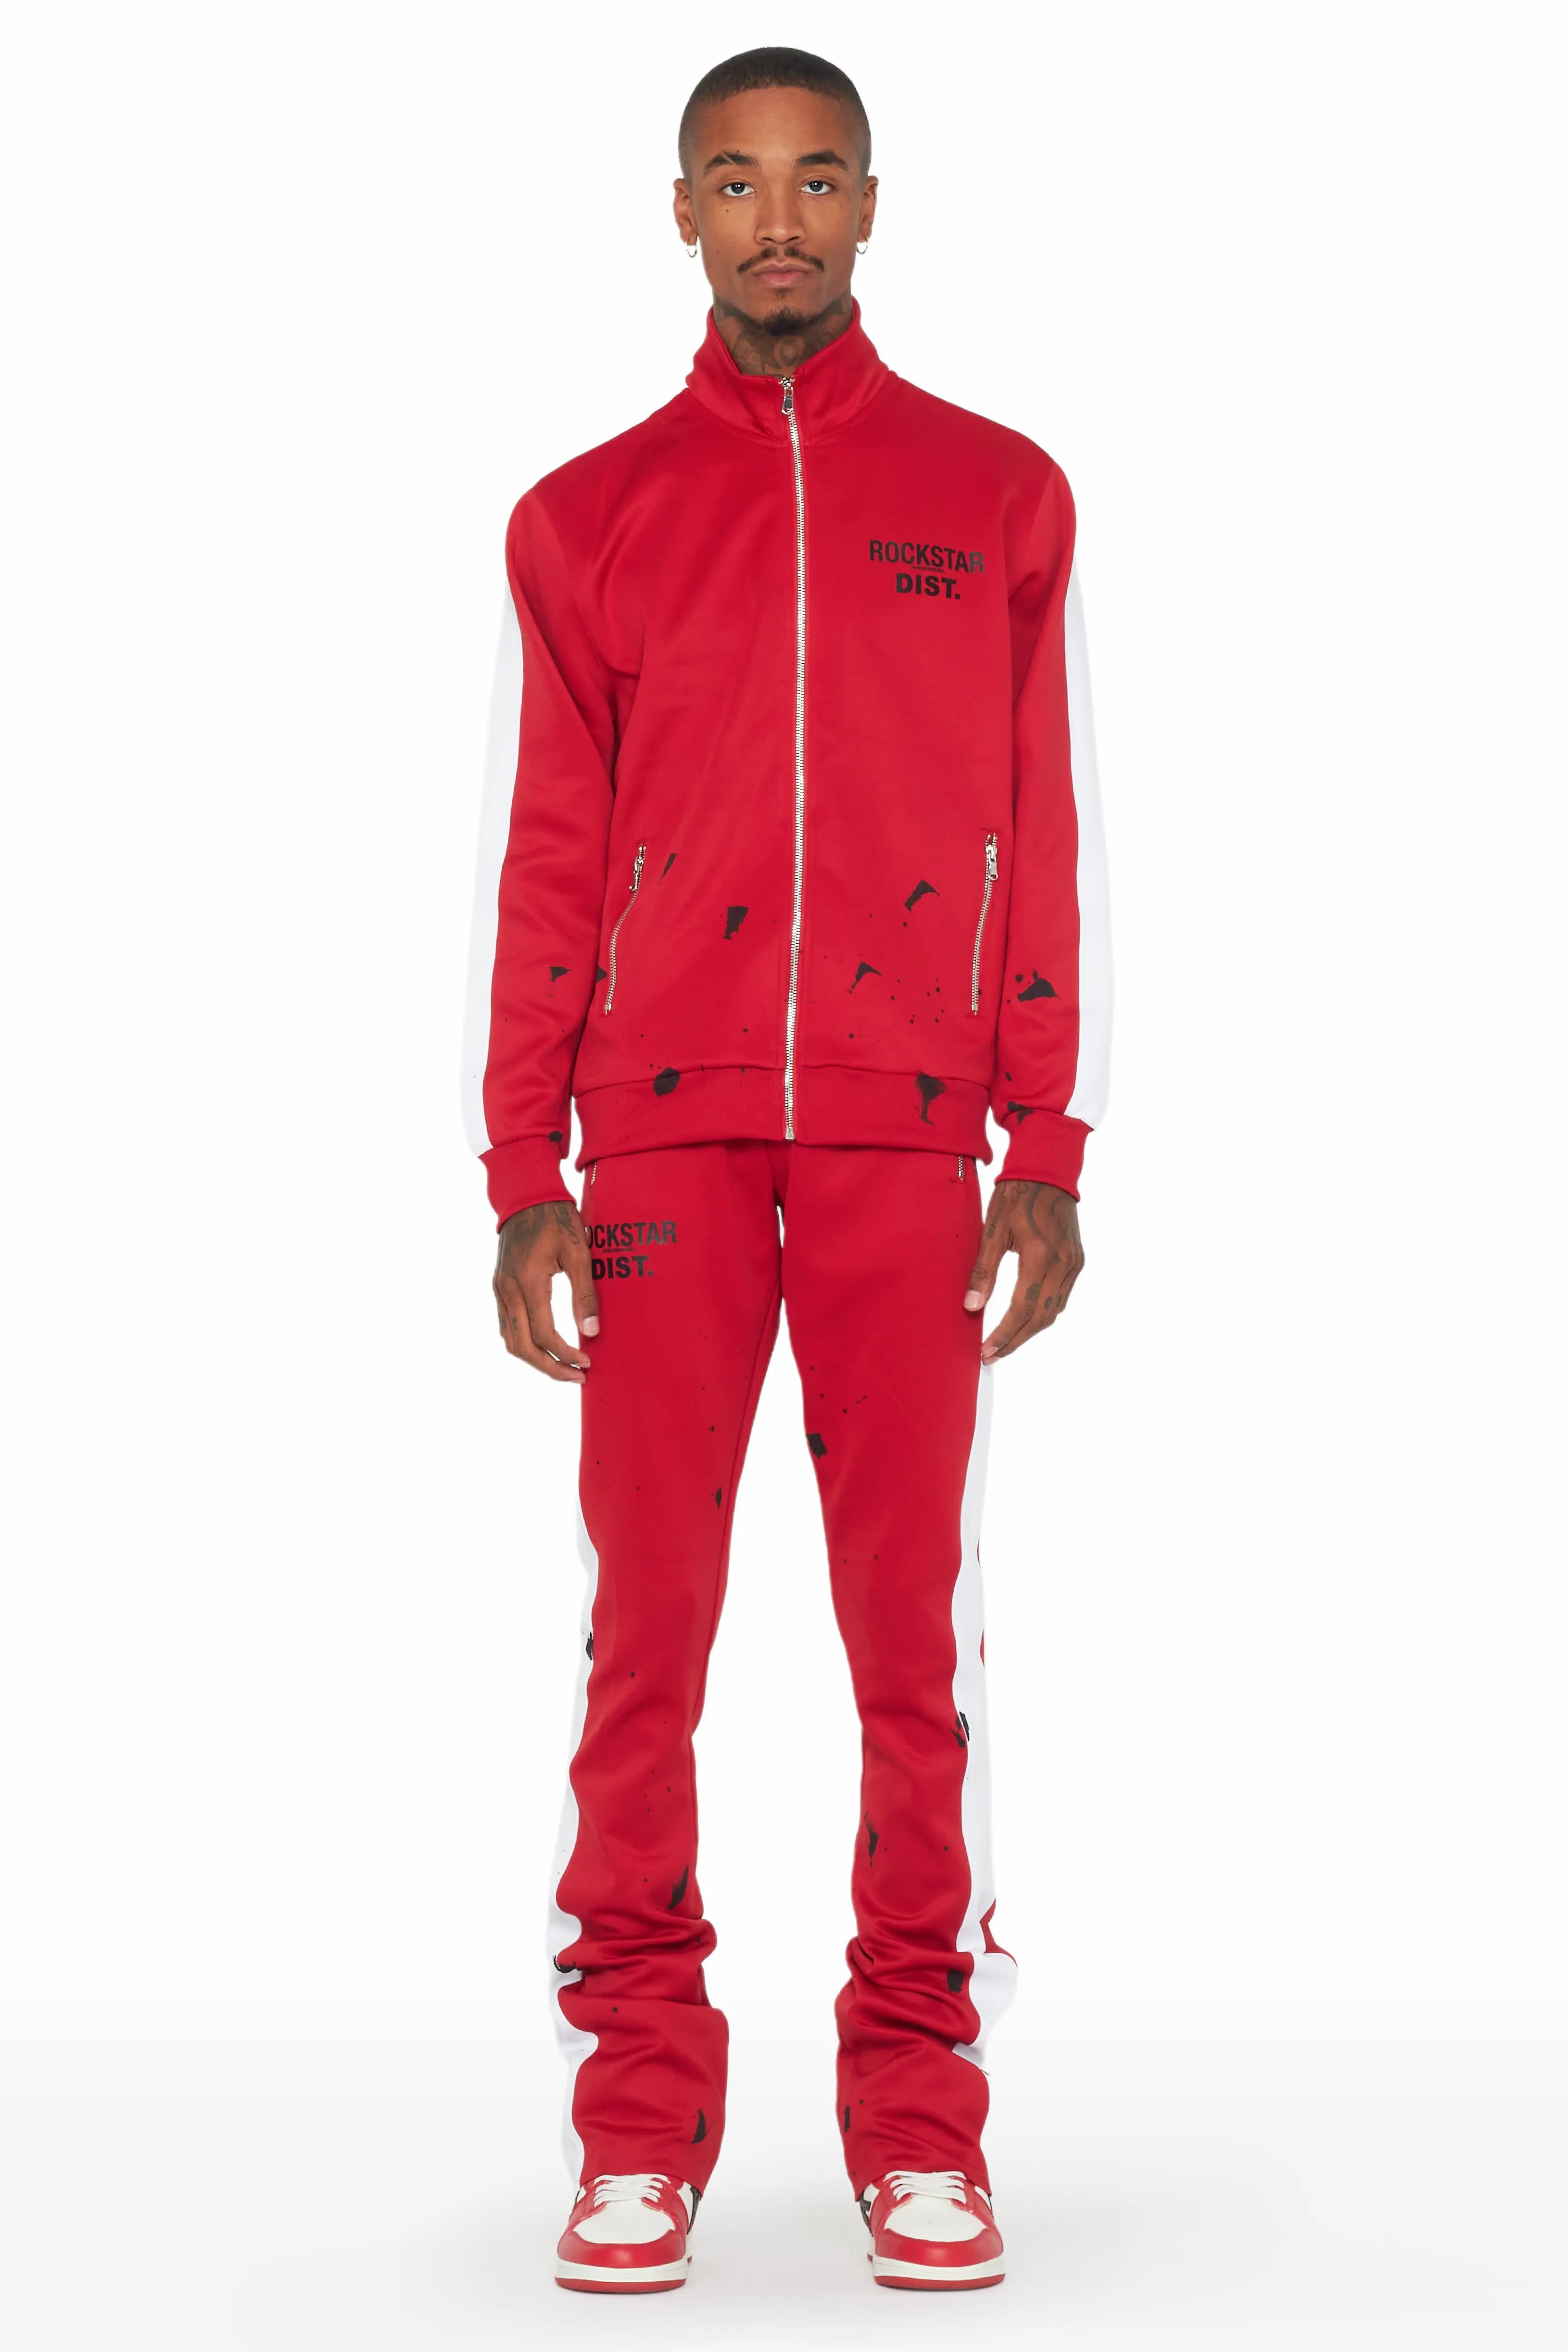 Men's Red Tracksuit, Red Sweat Suit